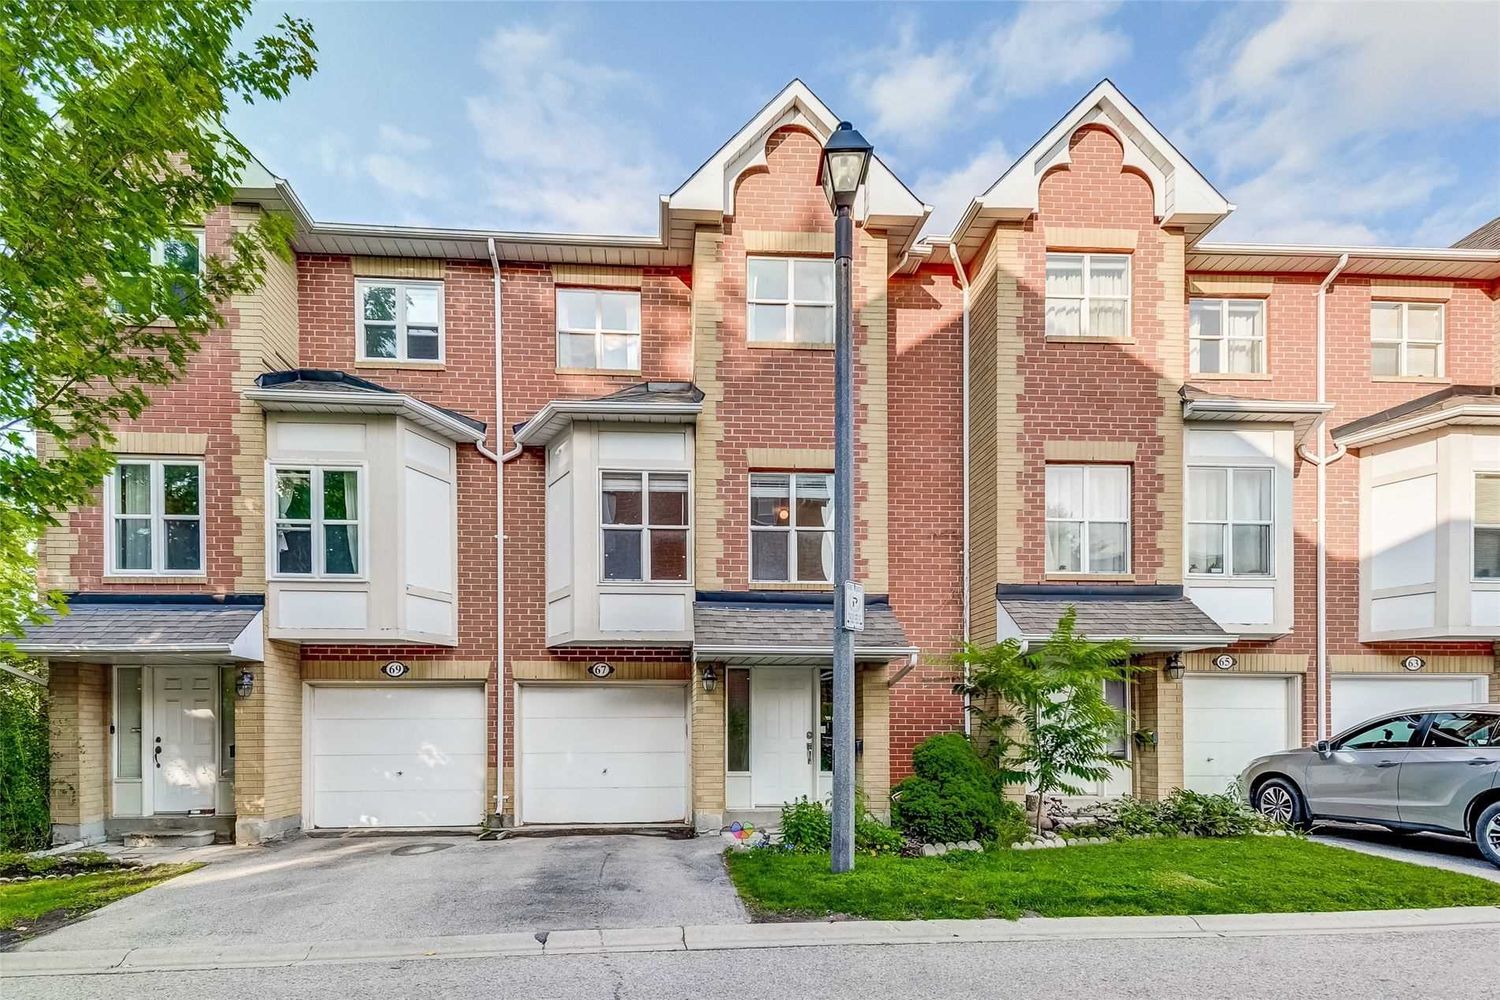 1-150 Maple Park Way. Maple Park Way Townhomes is located in  Markham, Toronto - image #1 of 3